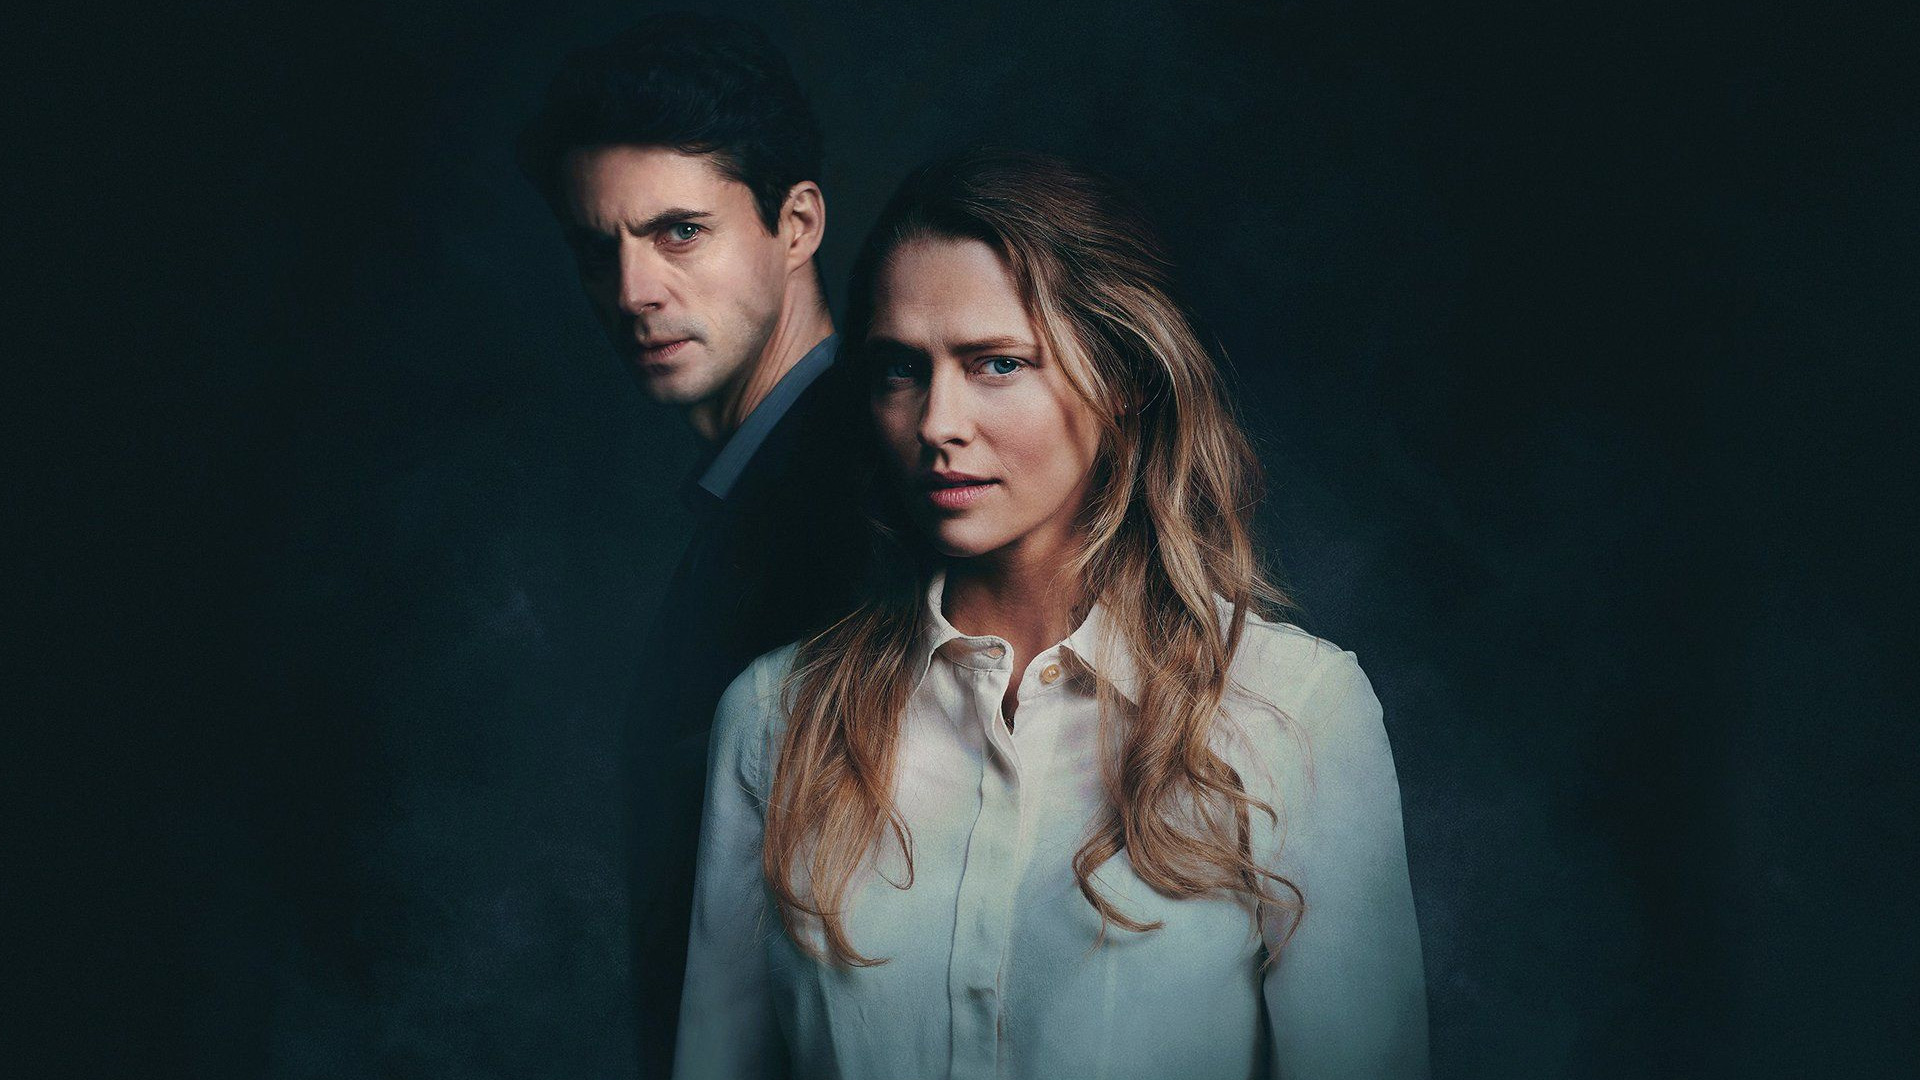 ADISCOVERYOFWITCHES